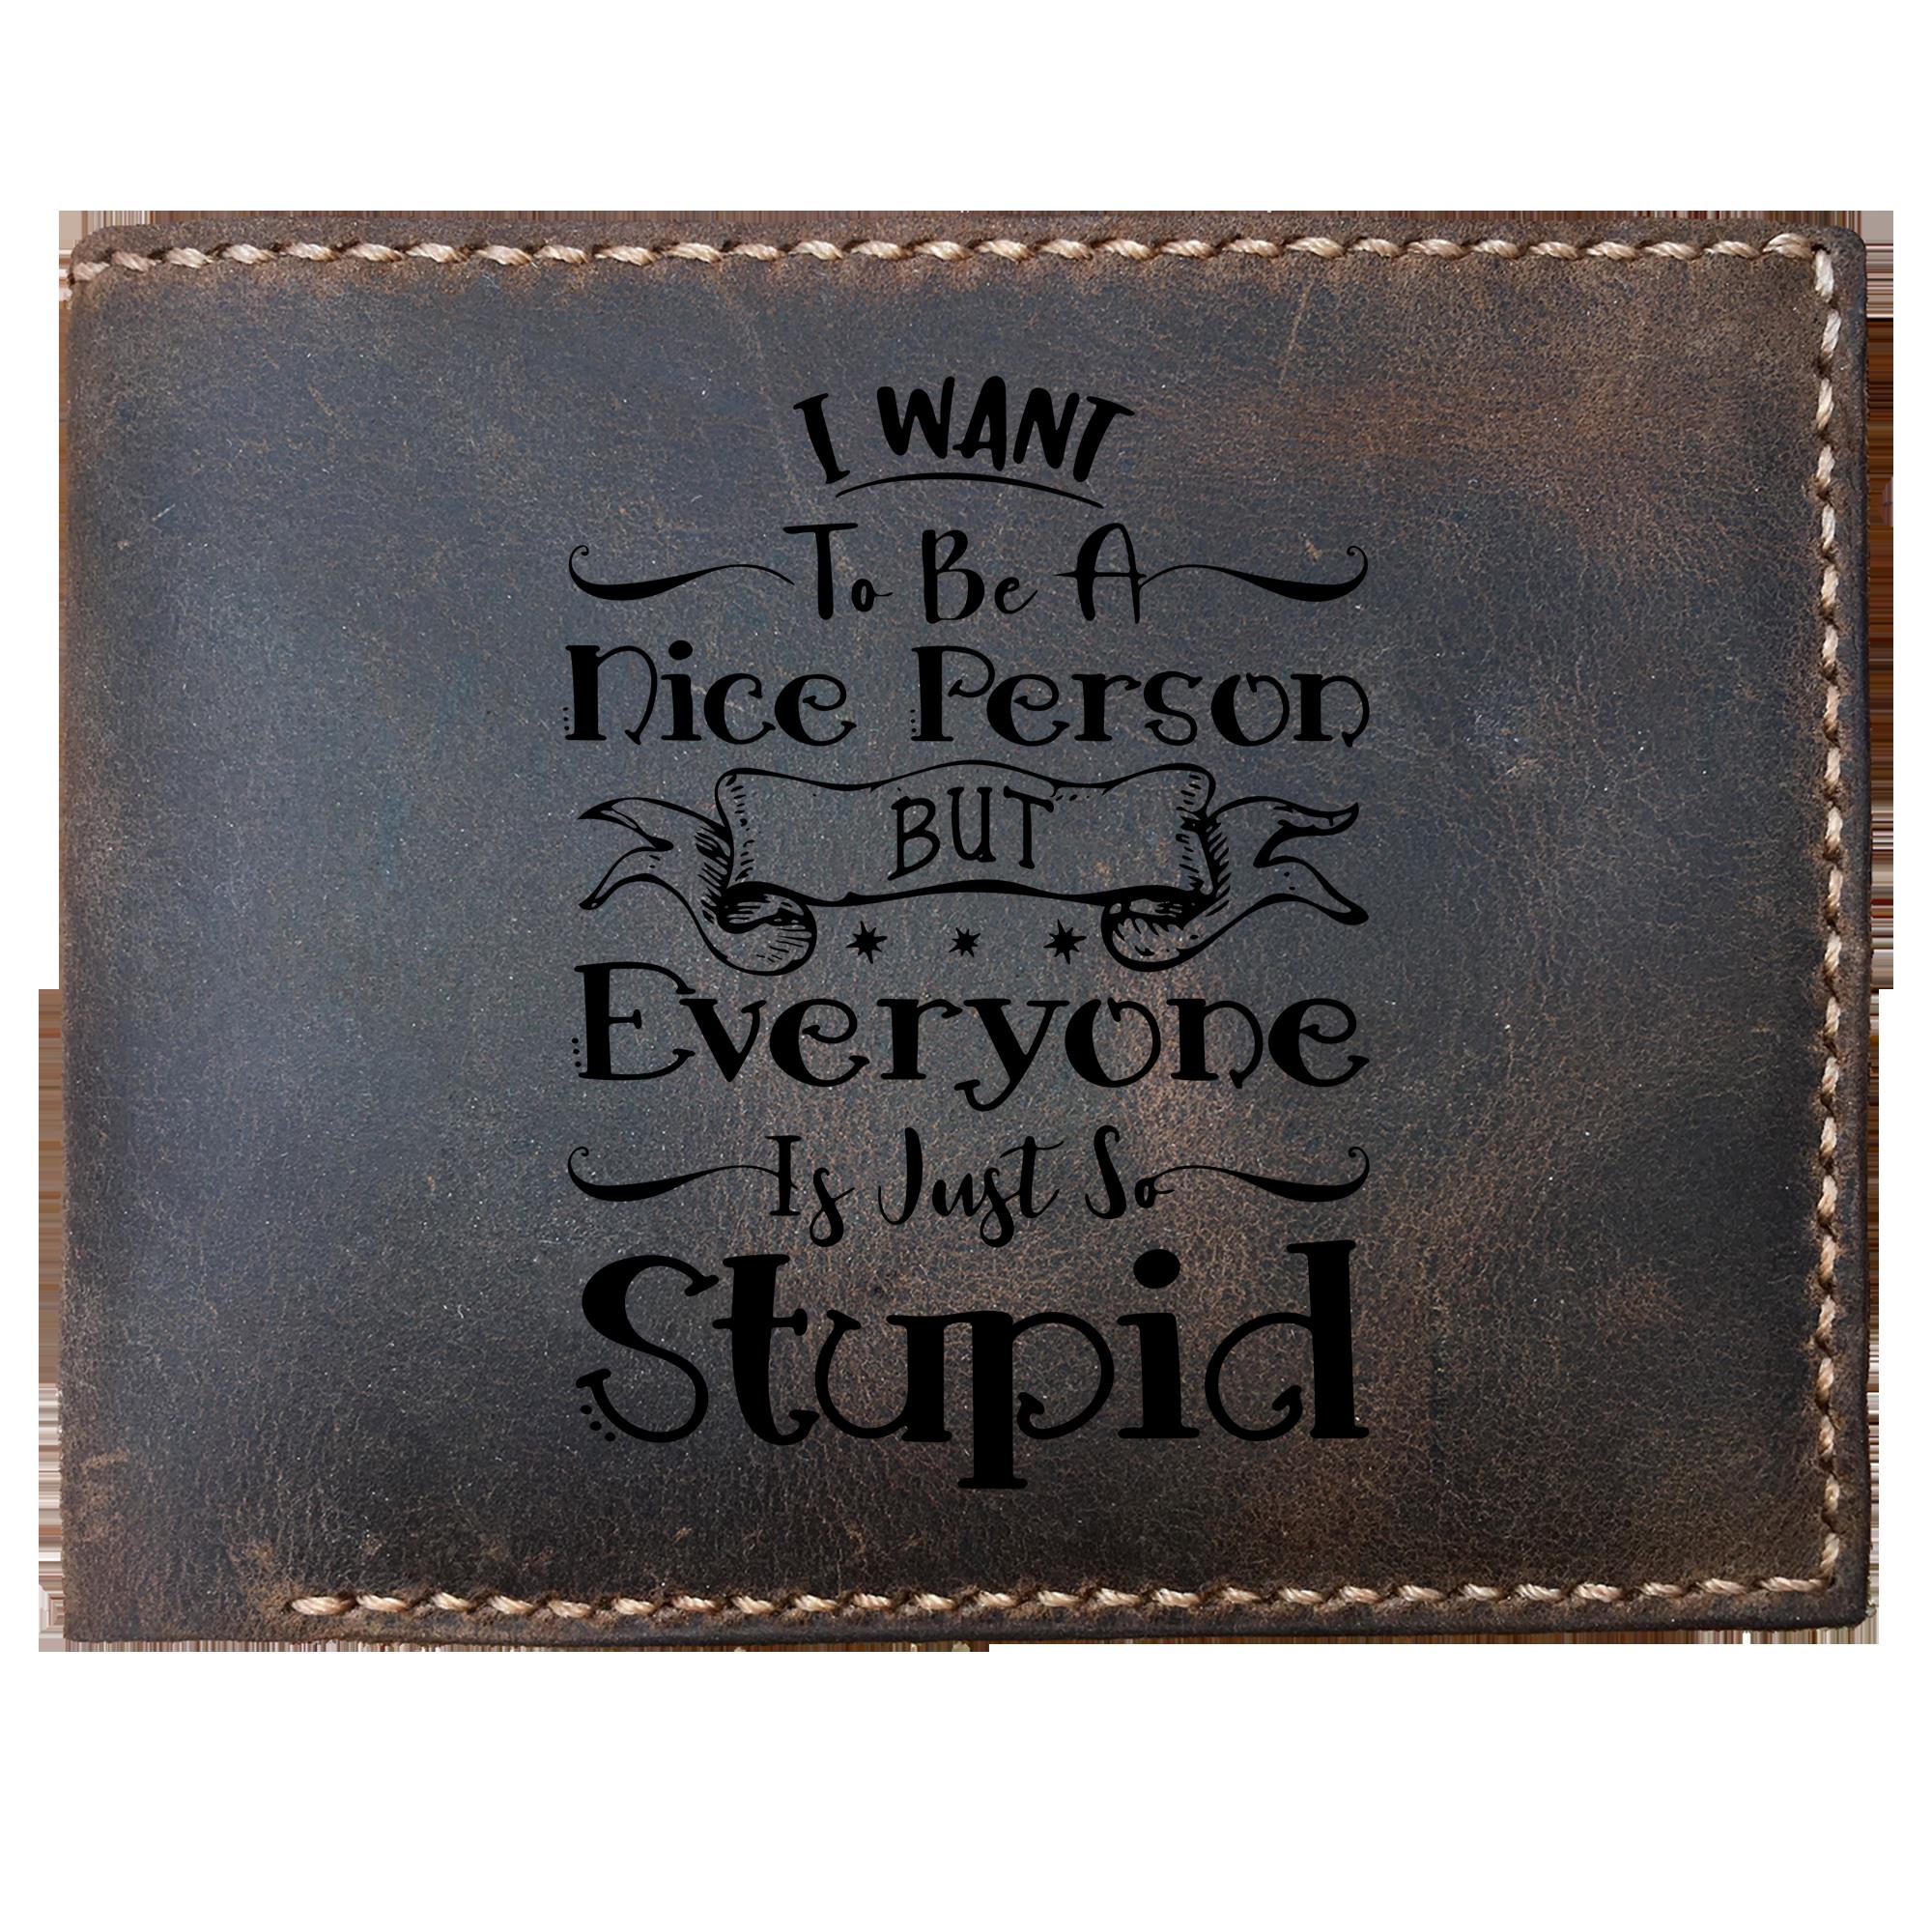 Skitongifts Funny Custom Laser Engraved Bifold Leather Wallet For Men, I Want To Be A Nice Person But Everyone Is Just So Stupid-1